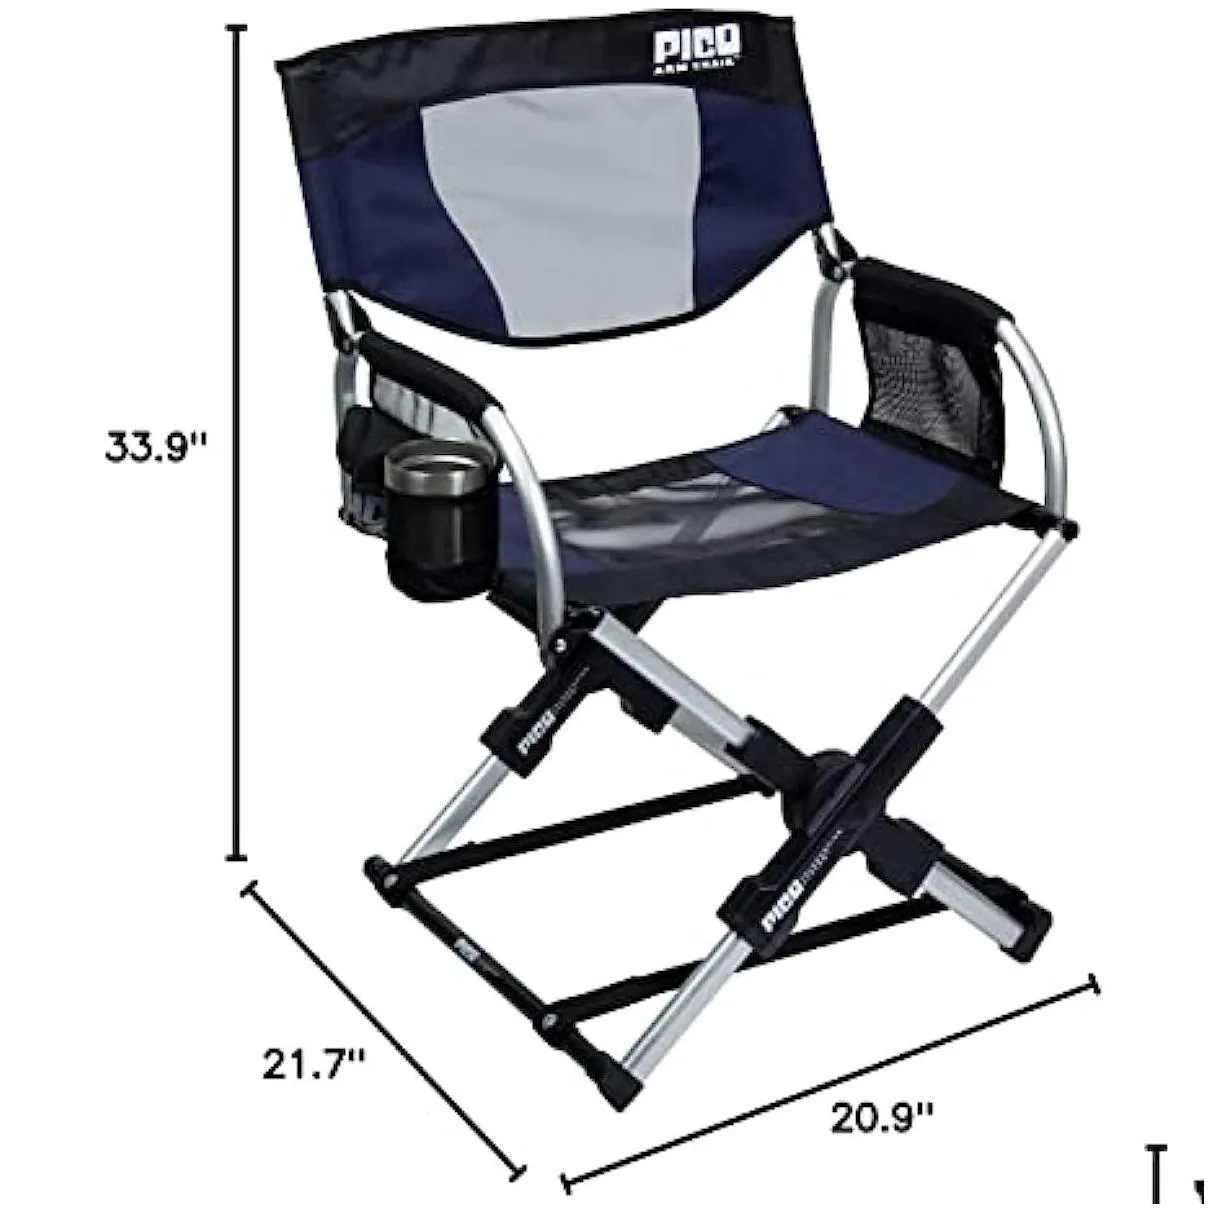 Camp Furniture Gci Outdoor Pico Arm Chair Folding Cam With Carry Bag Drop Delivery Sports Outdoors Camping Hiking Hiking And Camping Dhinh